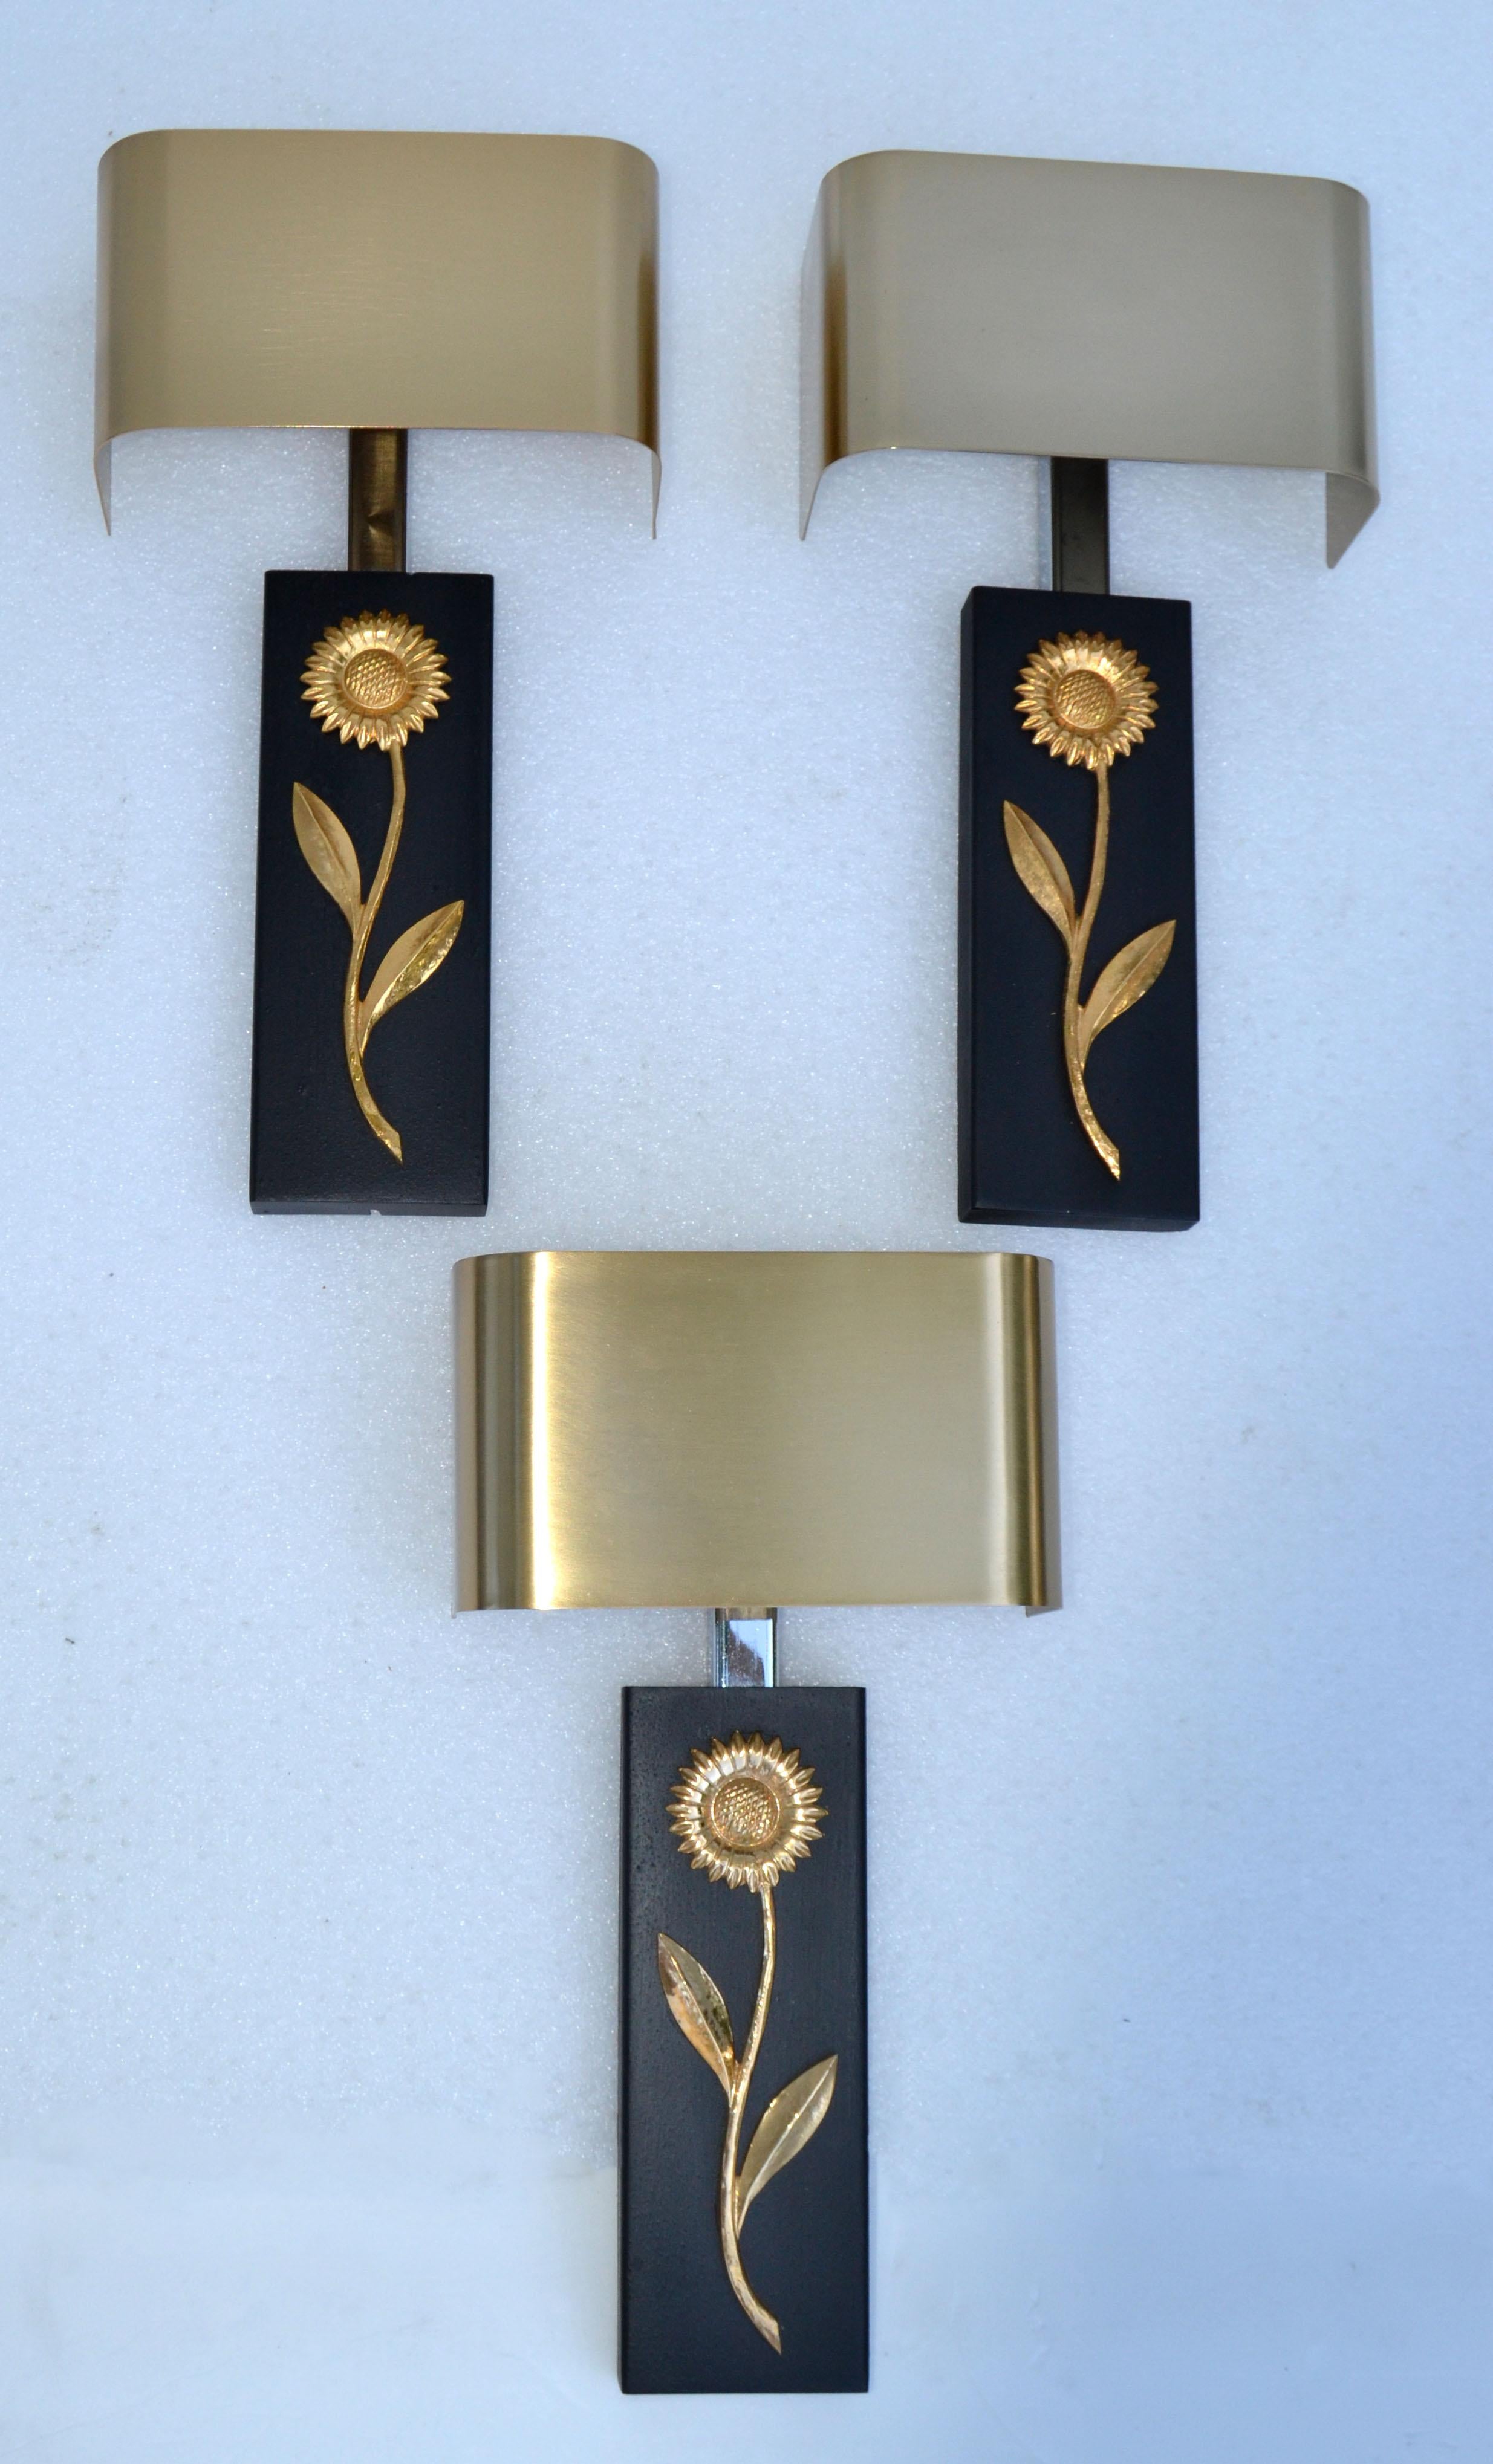 3 Maison Charles Bronze, Brass & Steel Sconces, Wall Lights Brushed Brass Shades 10